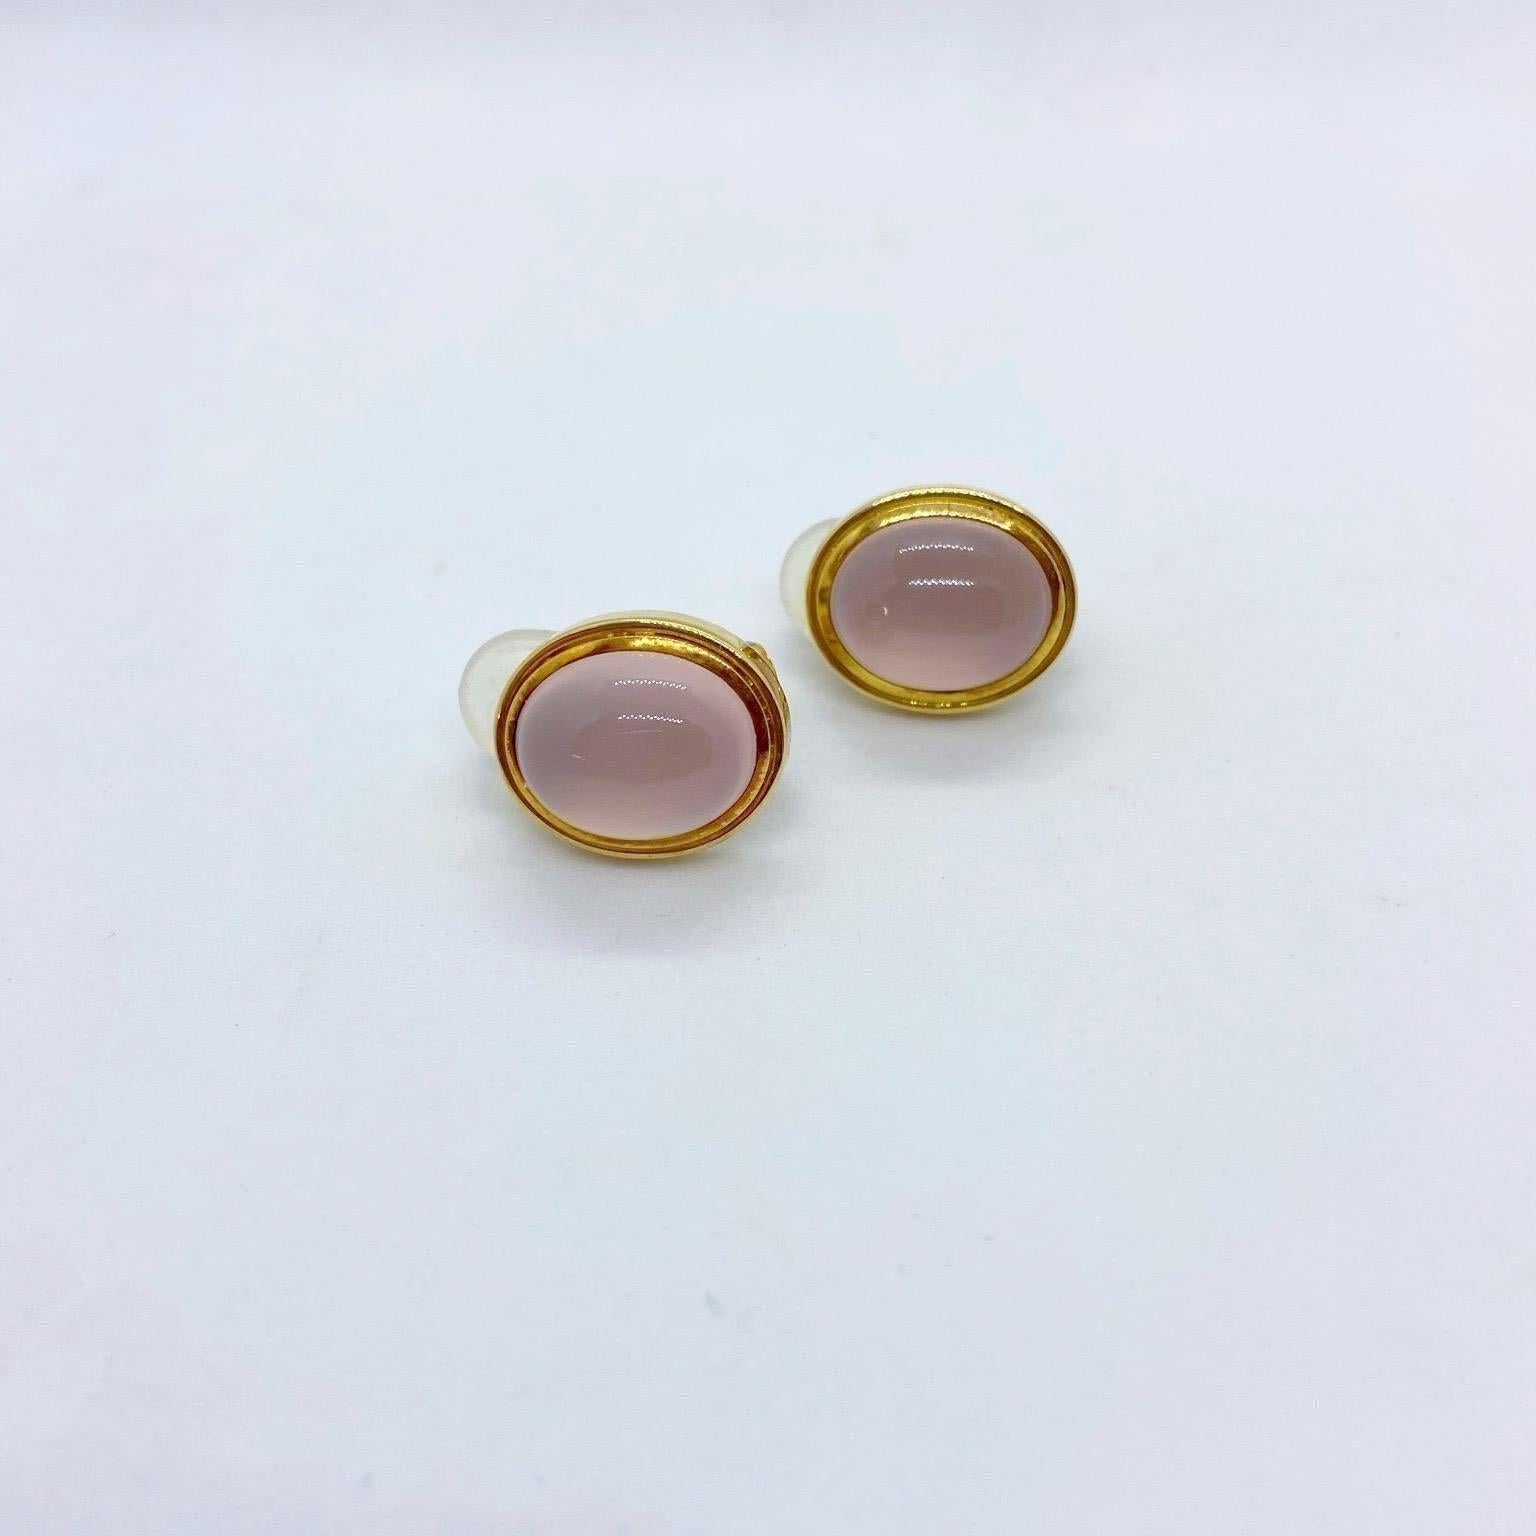 Started in 1967 by Leo and Ginnie de Vroomen the company is known for bold and innovative designs. Distinctive from the start, the renowned company is simply known as de Vroomen.
These 18 karat yellow gold earrings feature oval rose quartz cabochon